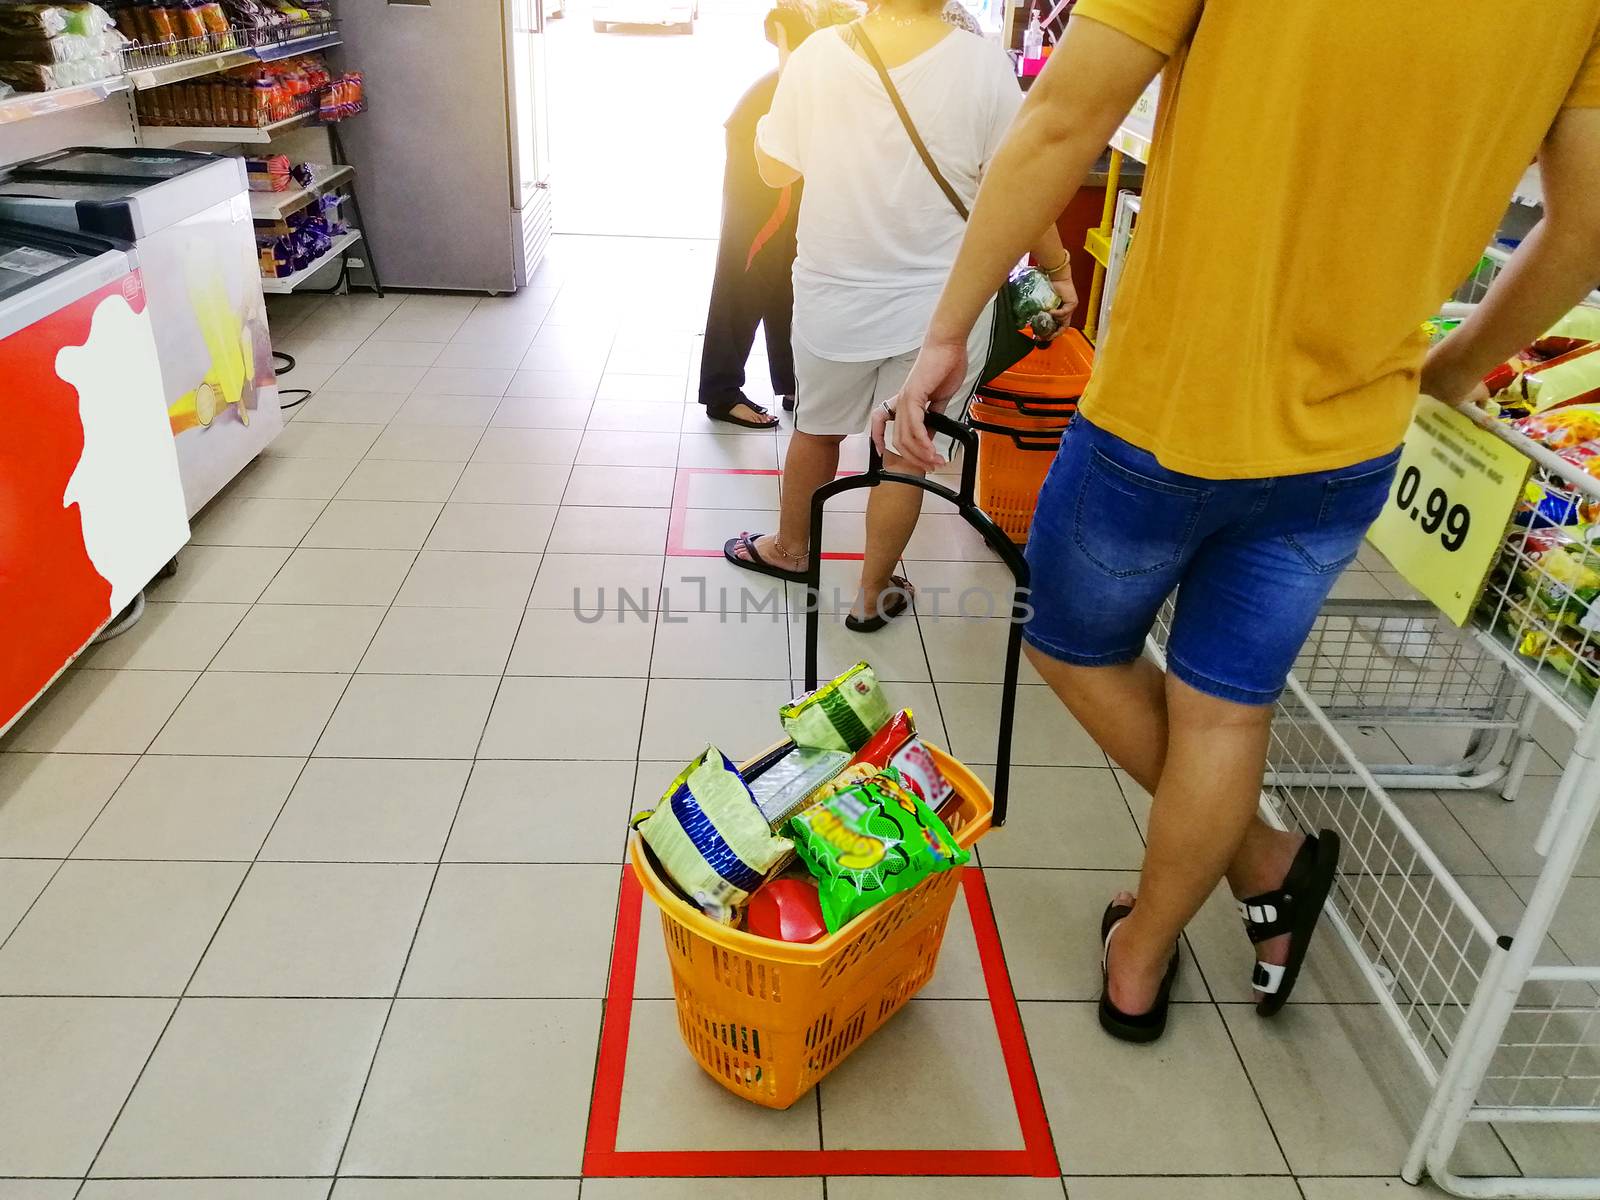  Grocery shoppers practise social distancing as they queue to make payment for coronavirus infection risk at supermarket.